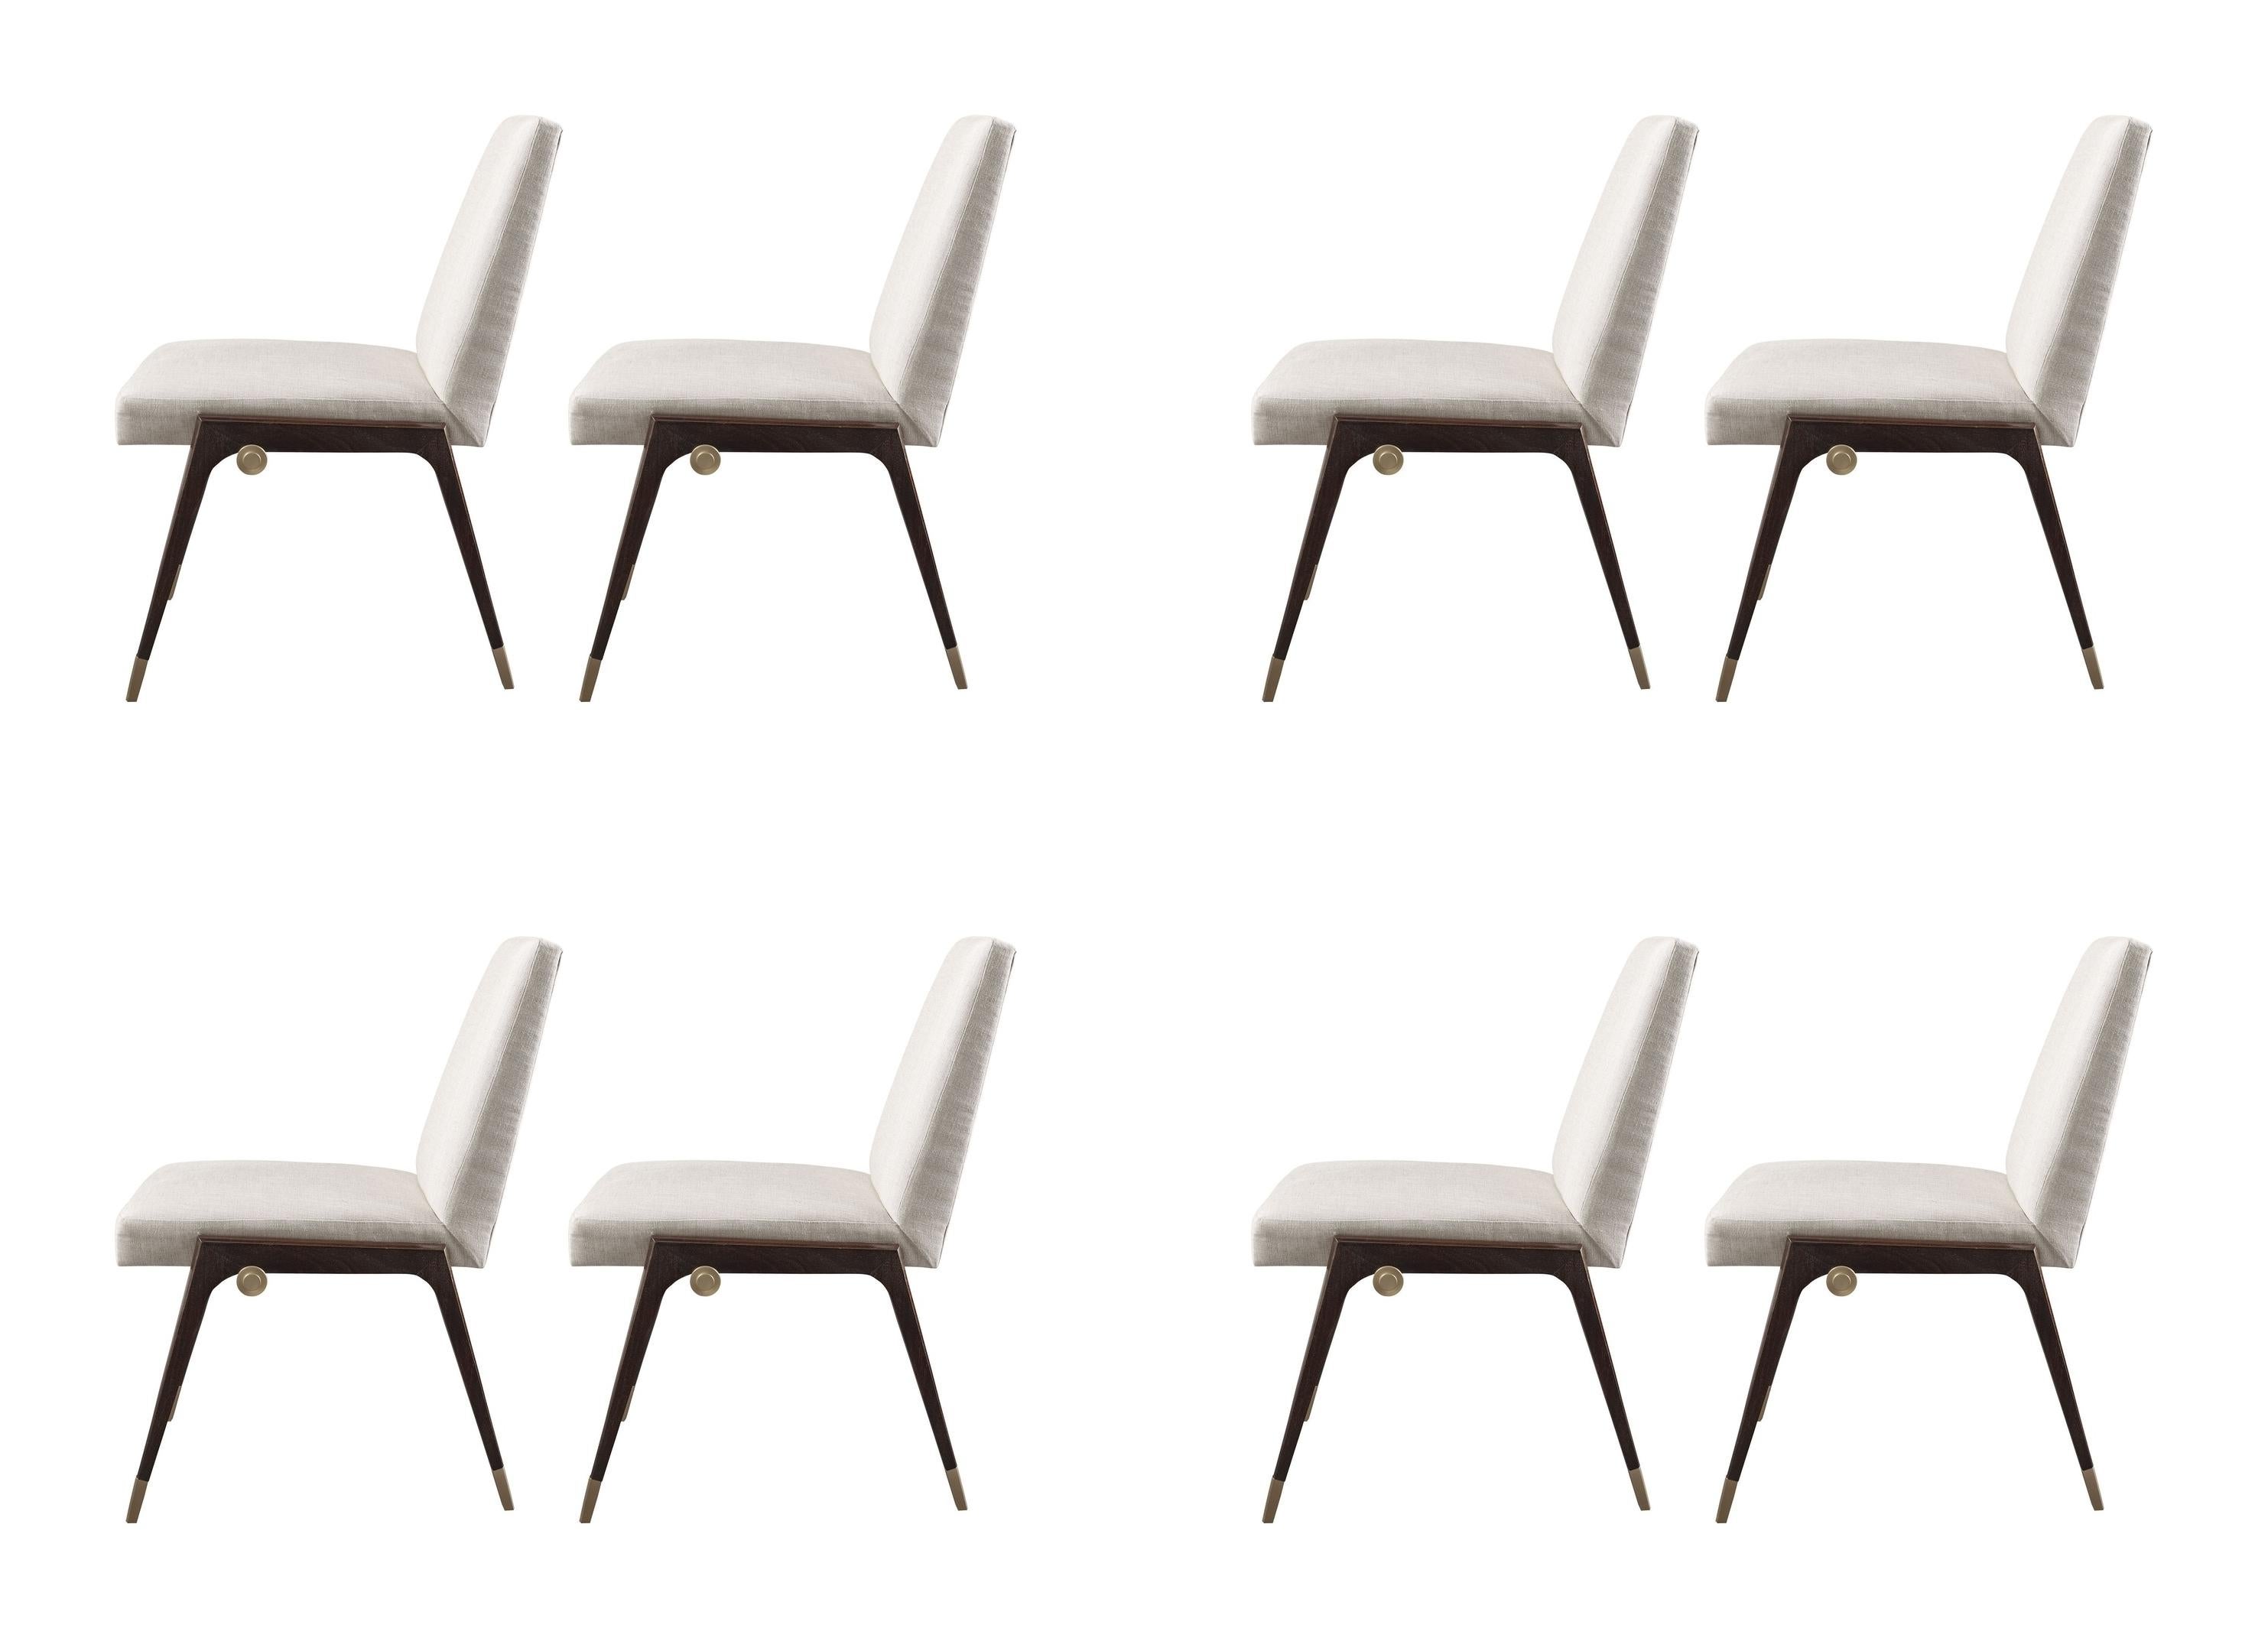 Aesthetic Movement Set of 8 Sling Side Chairs by Thomas Pheasant for Baker